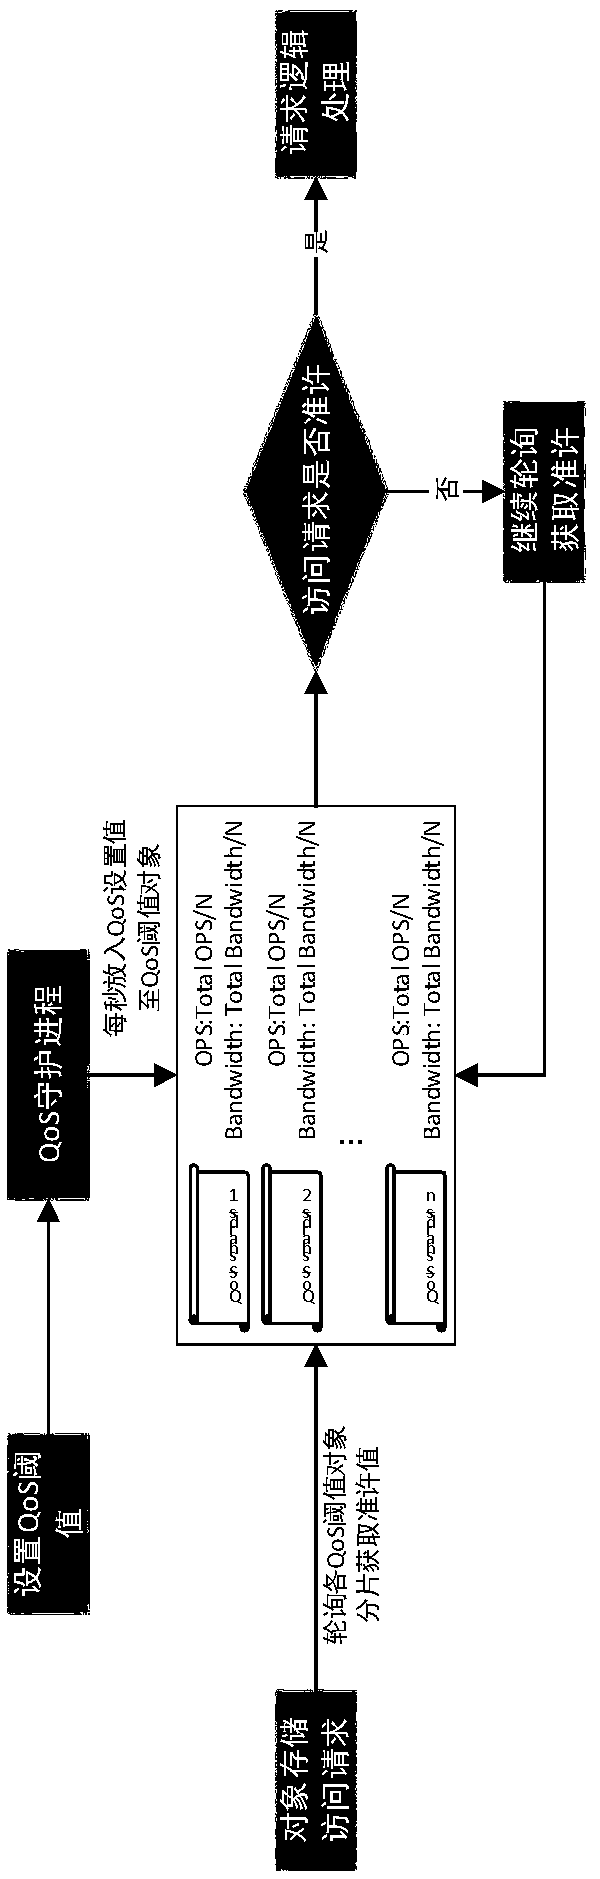 A method and apparatus for quality of service control of distribute storage